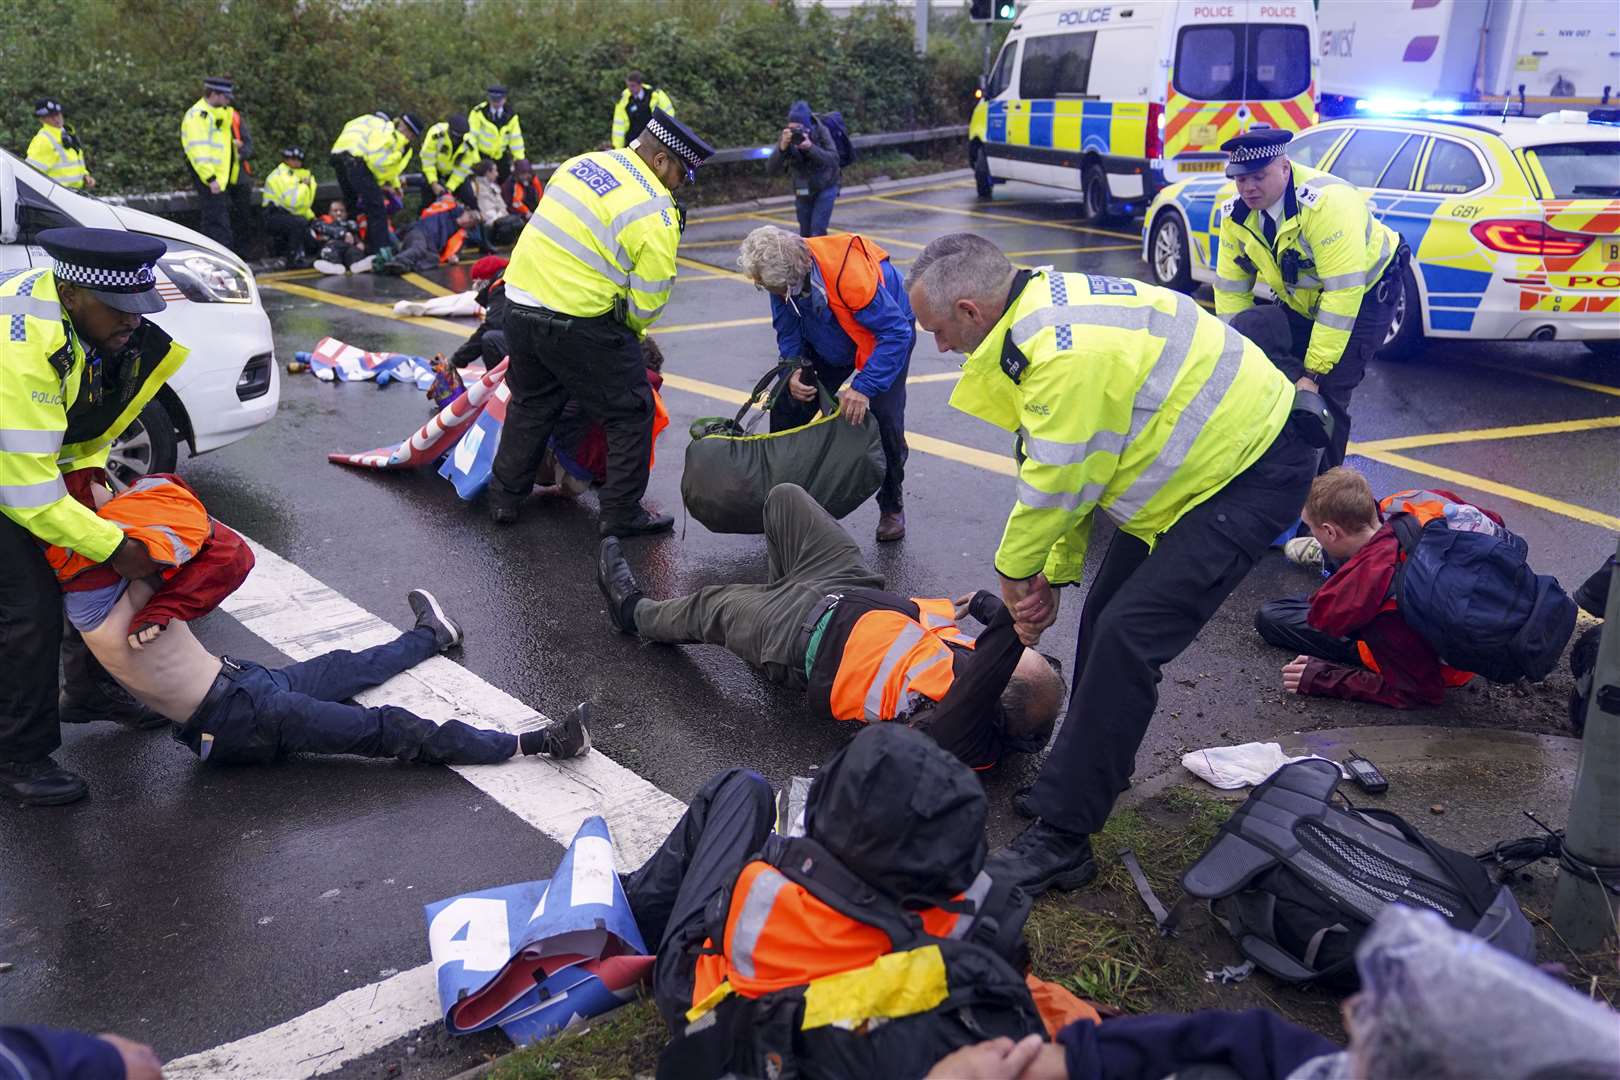 Police officers detain a protester from Insulate Britain near the M25 last month (PA)